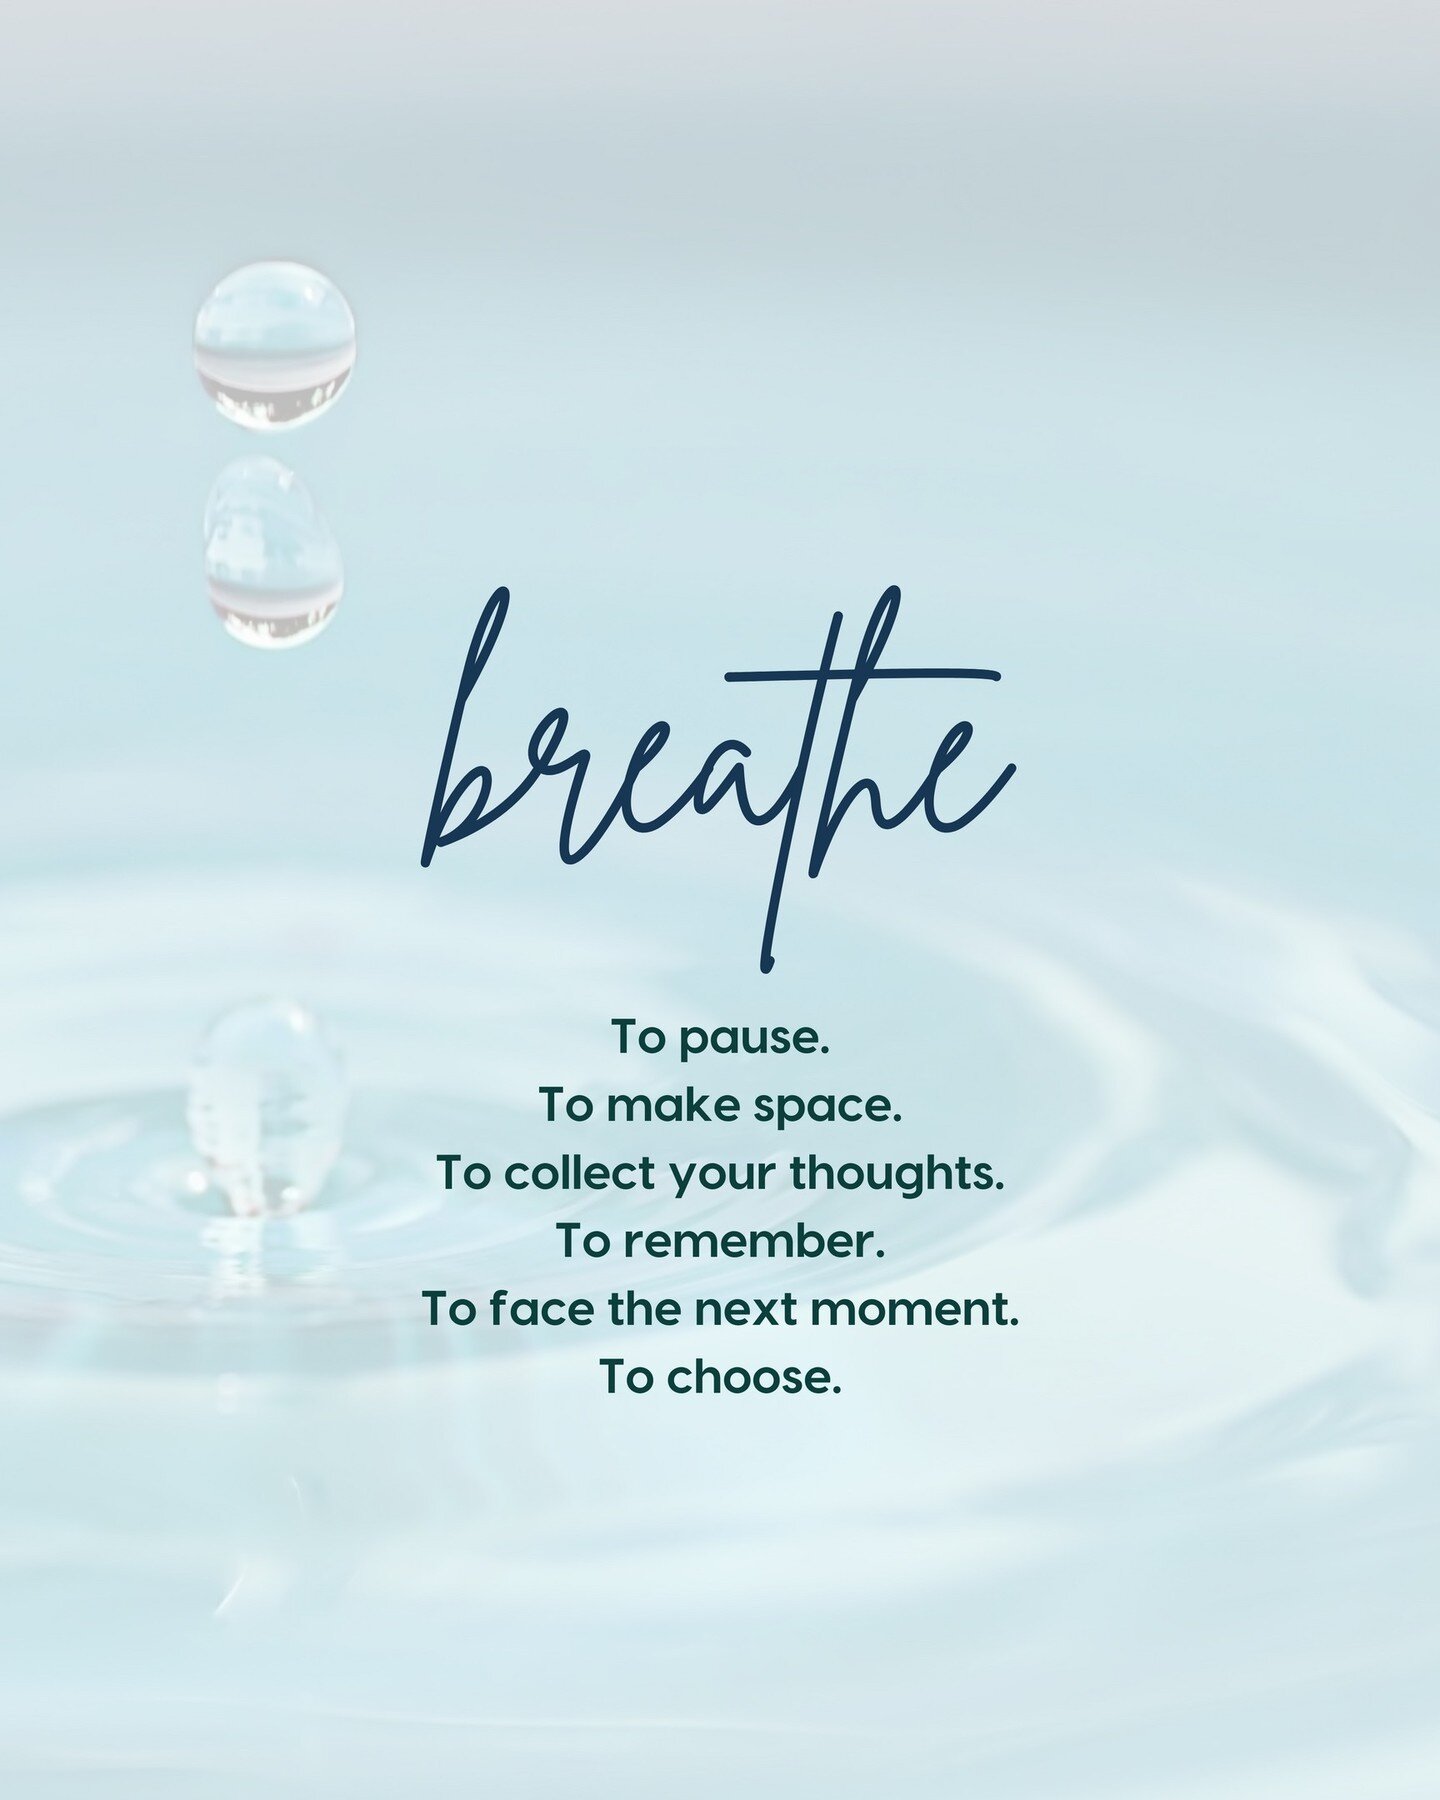 We know you're busy and we're sure some days it feels like there are never enough hours in the day. But sometimes, you just need to stop and breathe. Take a moment to pause, make space, collect your thoughts, remember what's important to you, face th